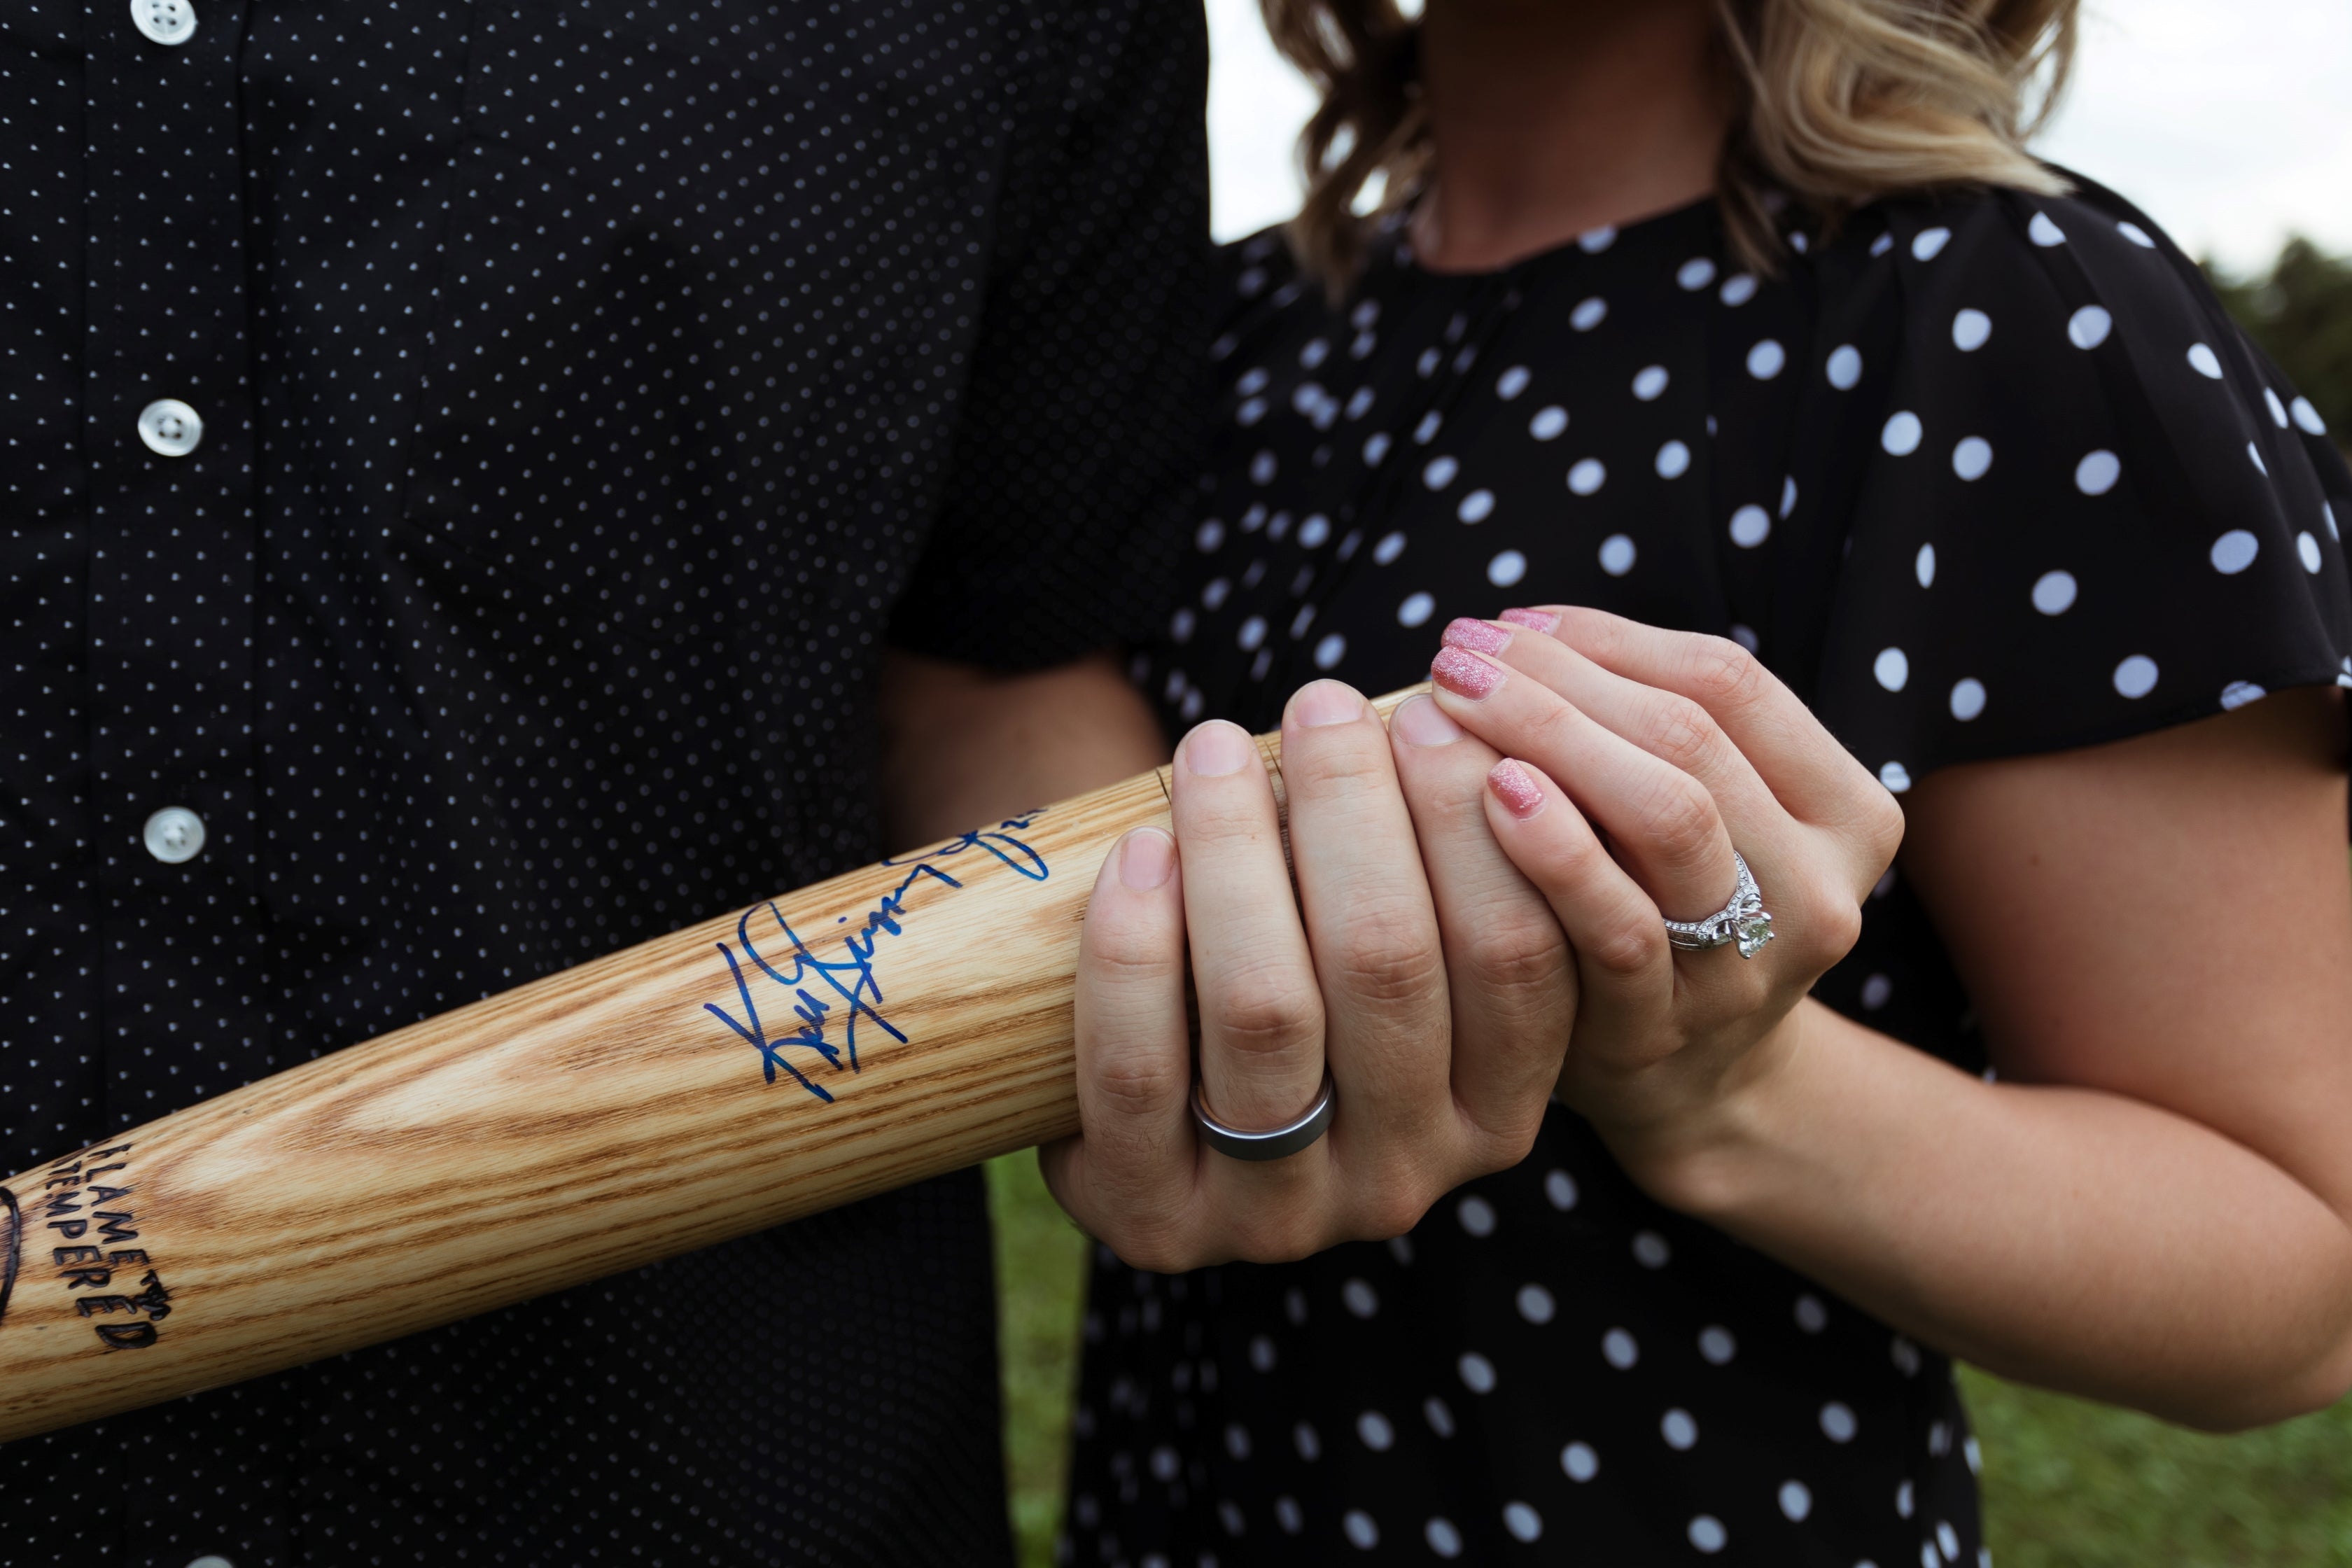 Couple holding a baseball bat used in ring on his finger